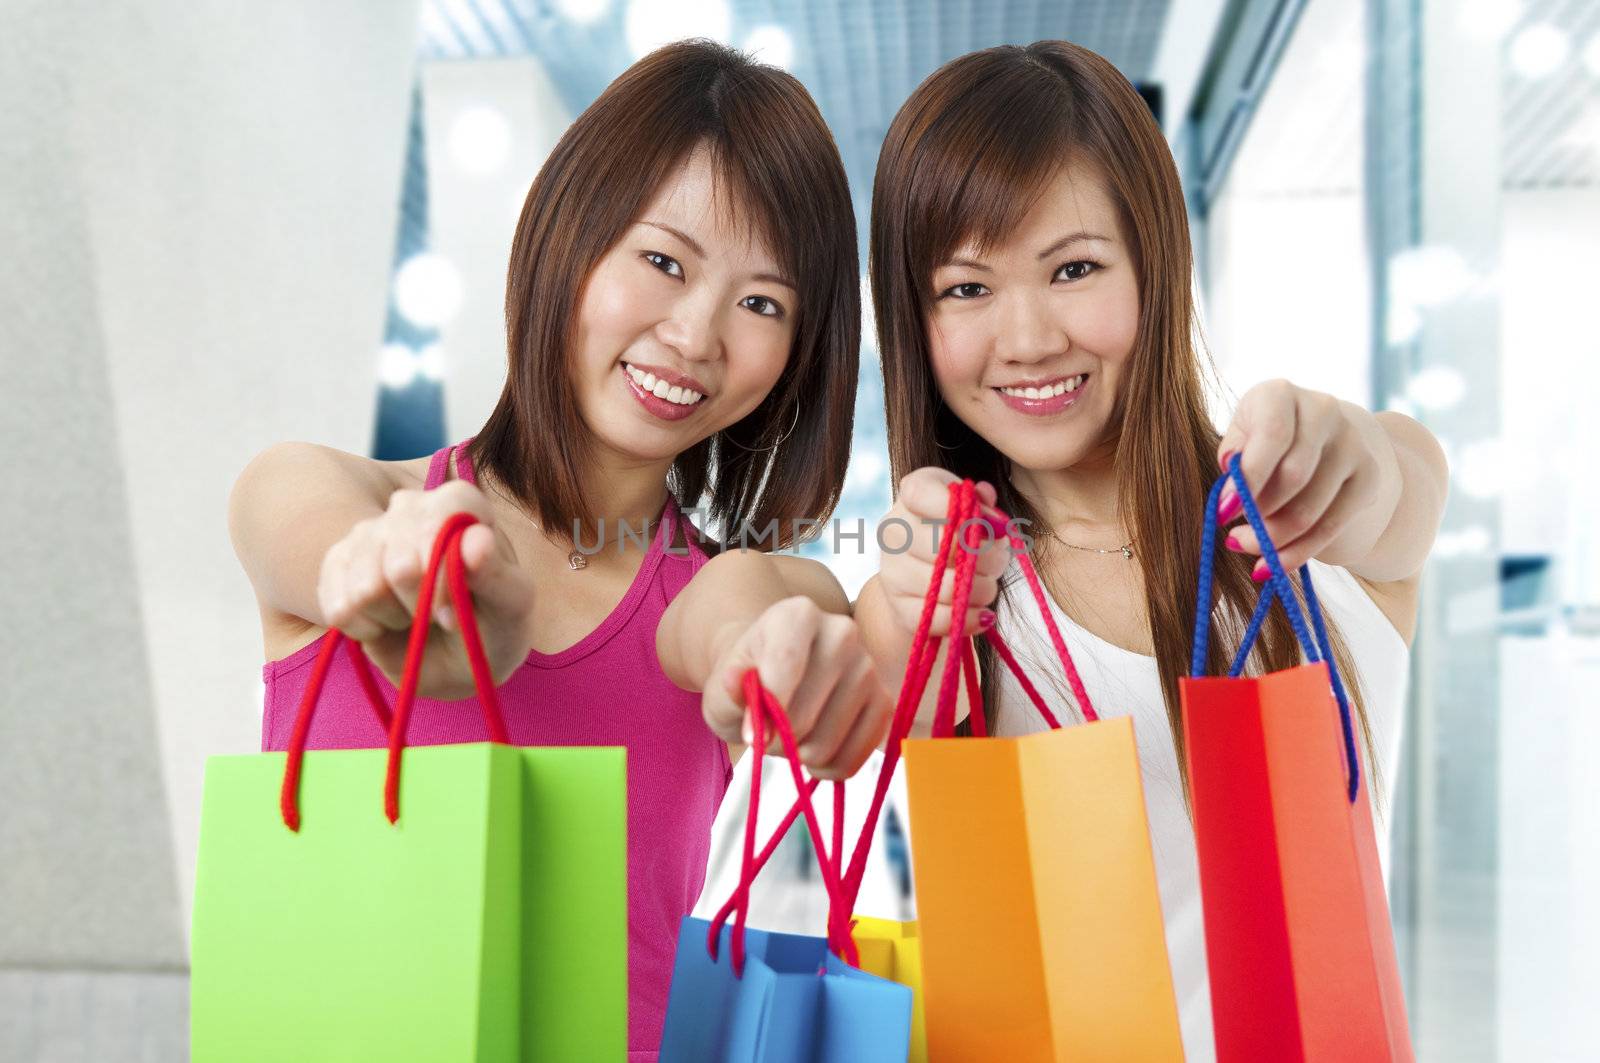 Happy Asian girls standing with shopping bags, shopping mall as background.